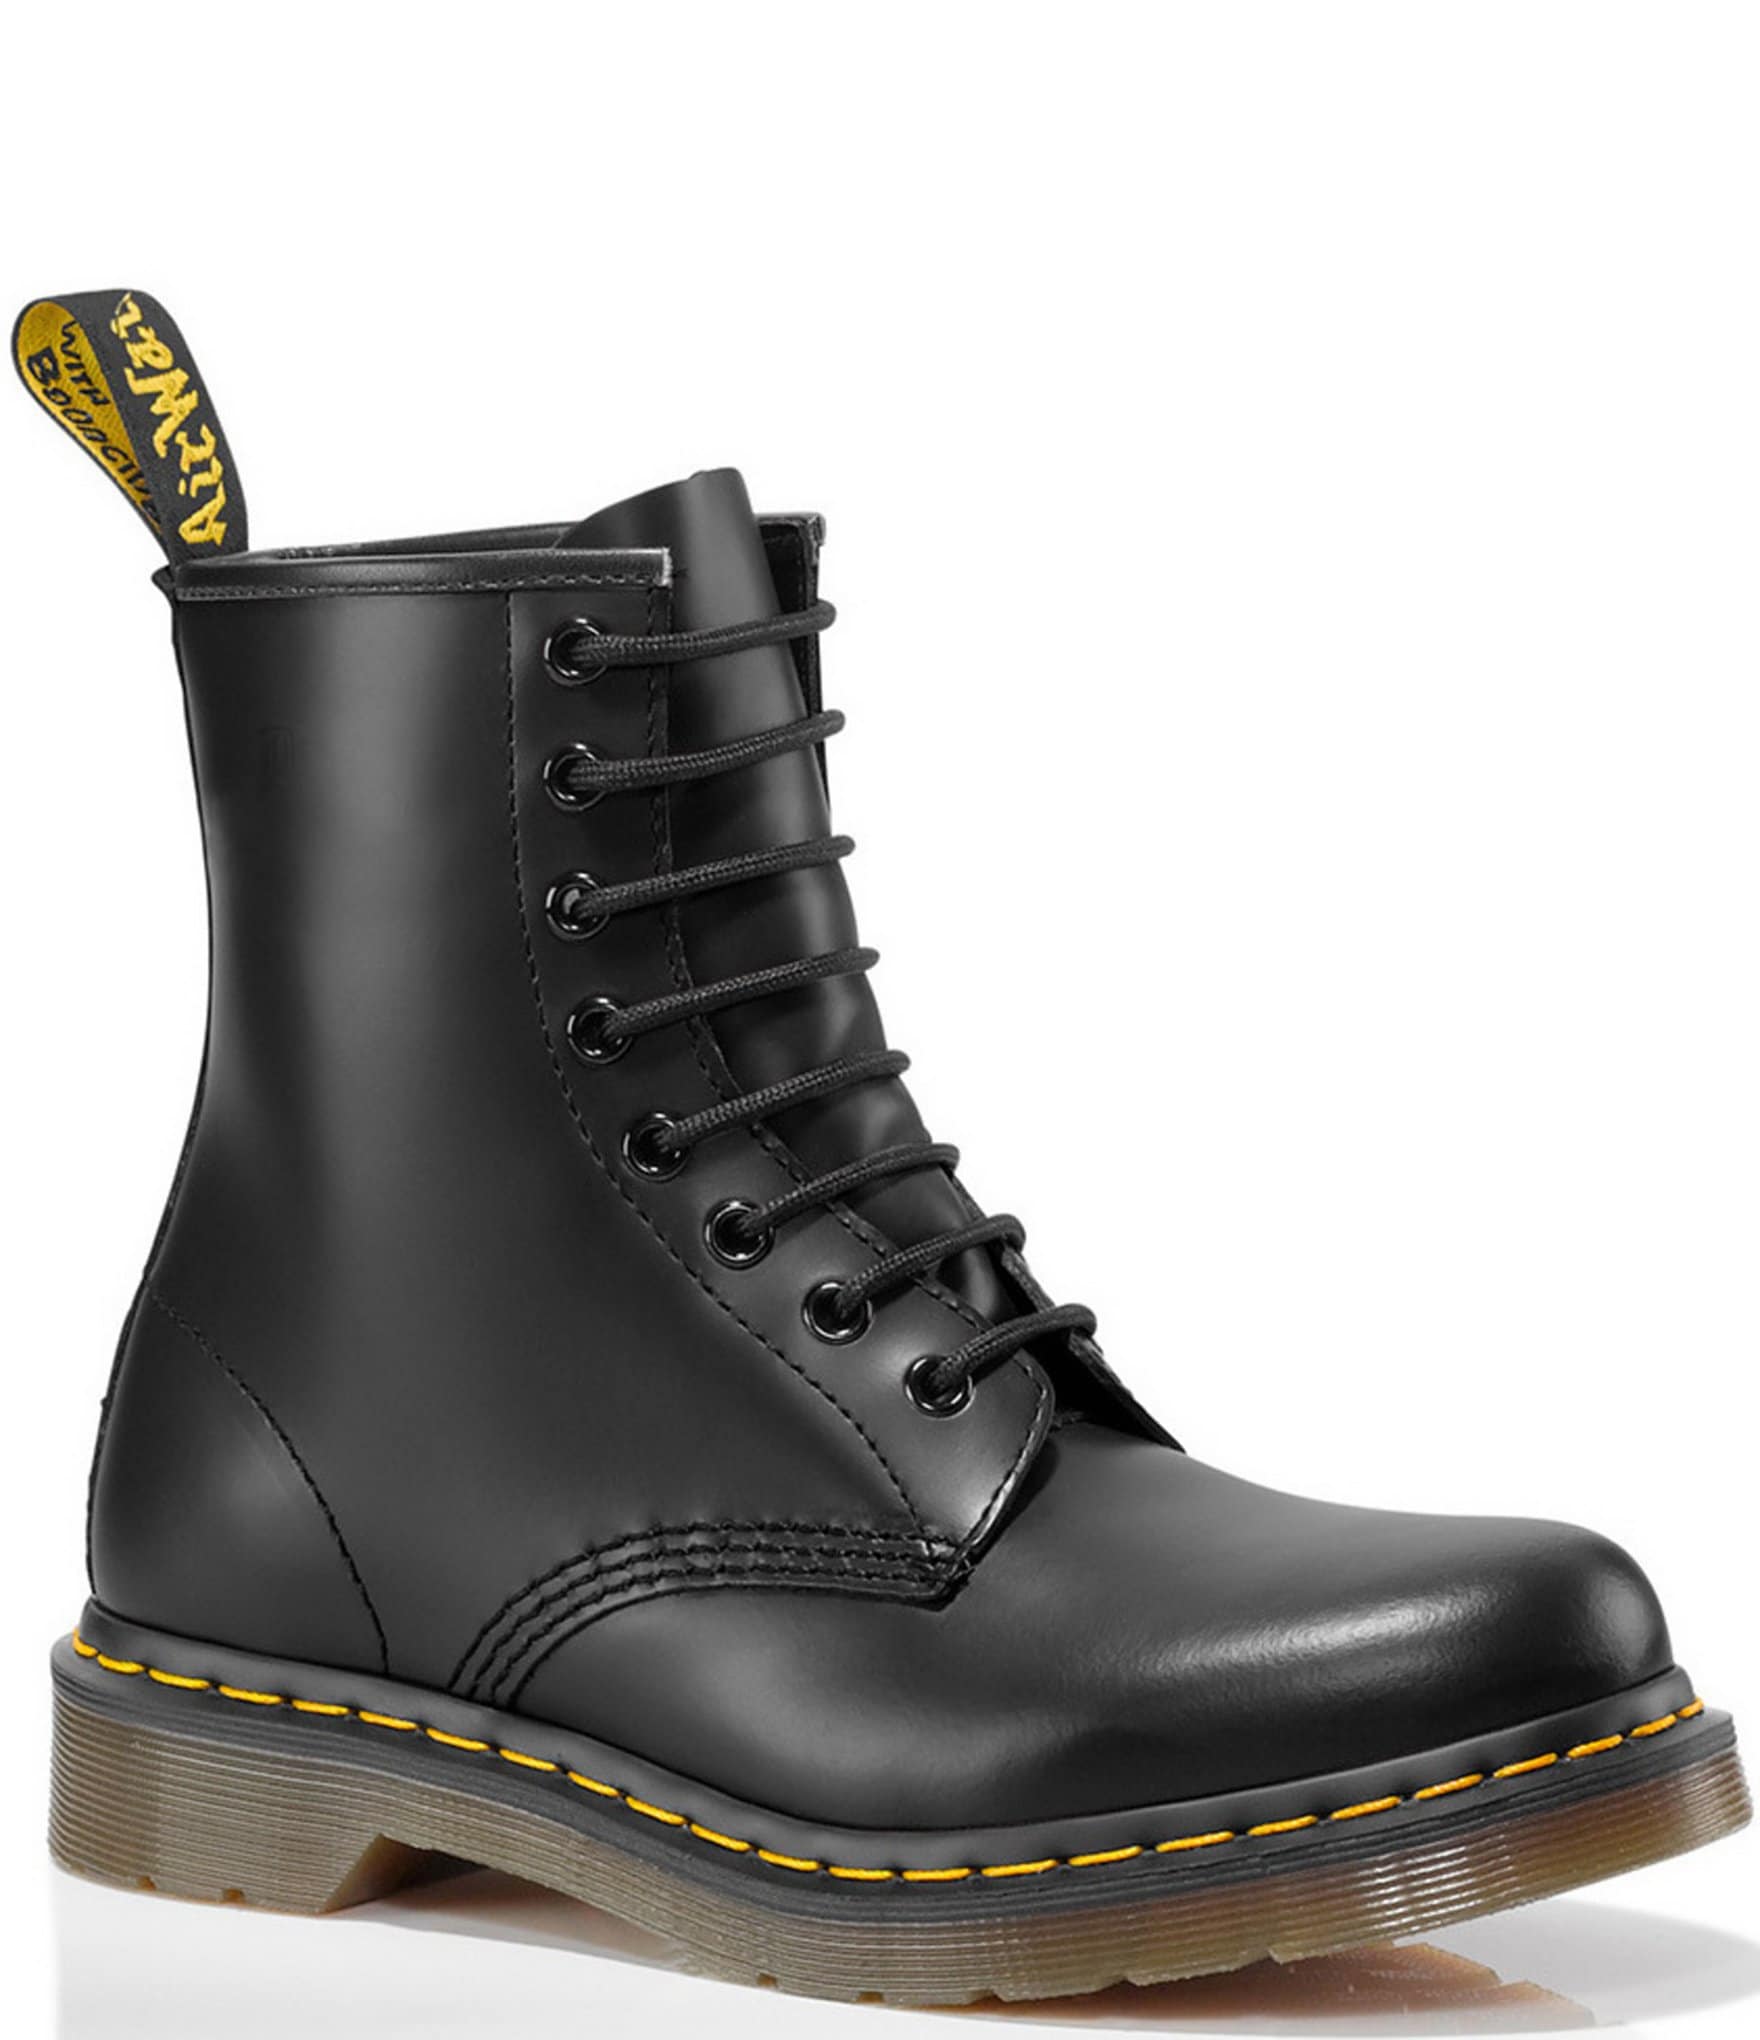 Martens Women's 1460 Smooth Leather Combat Boots | Dillard's